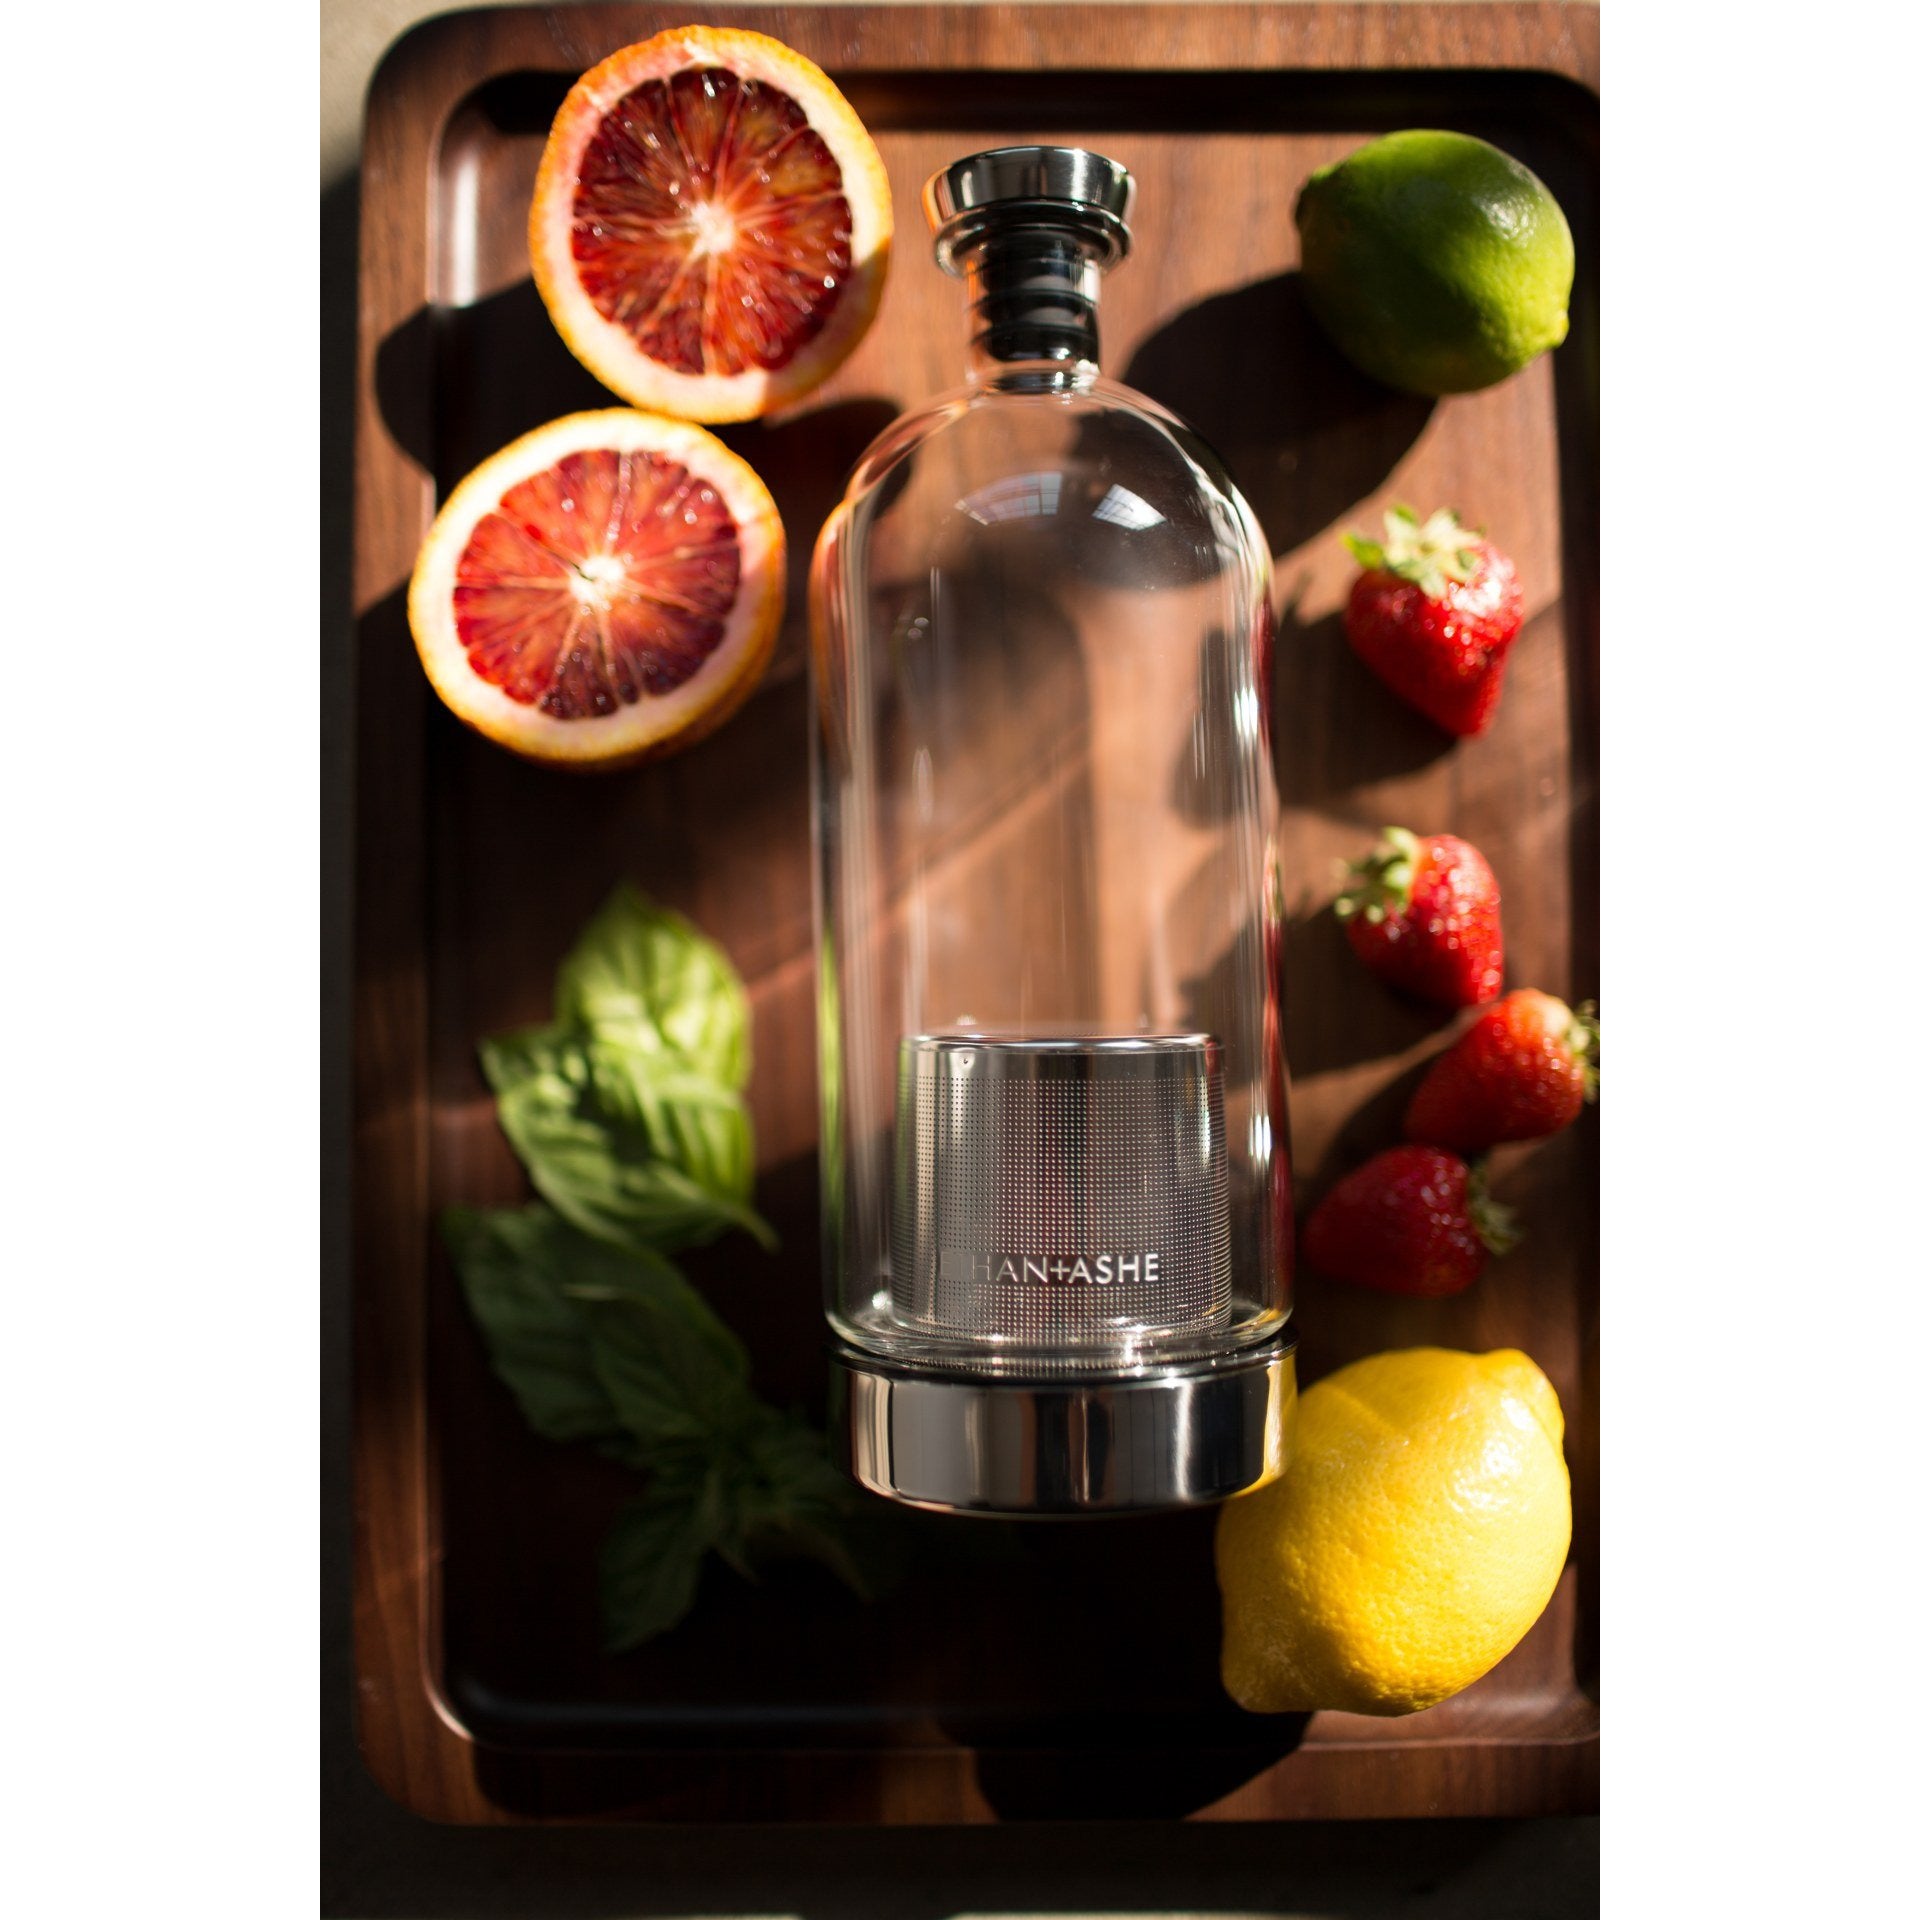 Alkemista Alcohol Infussion Kit that lets you infuse alcohol with your favorite flavors